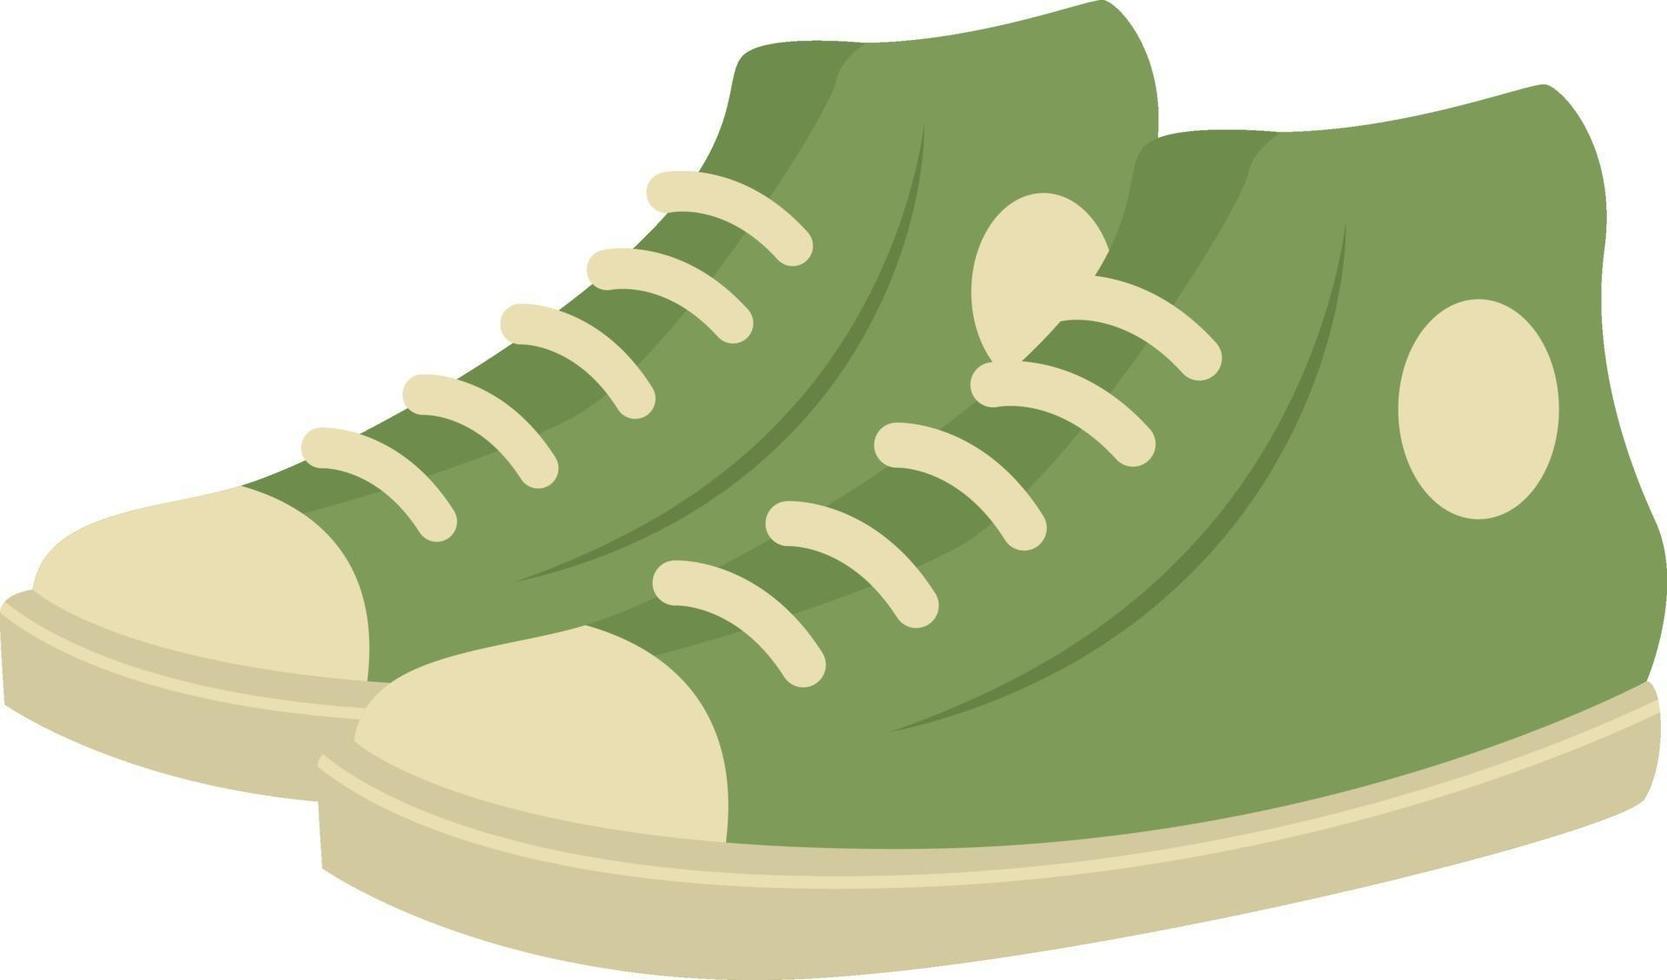 Green man sneakers, illustration, vector on white background